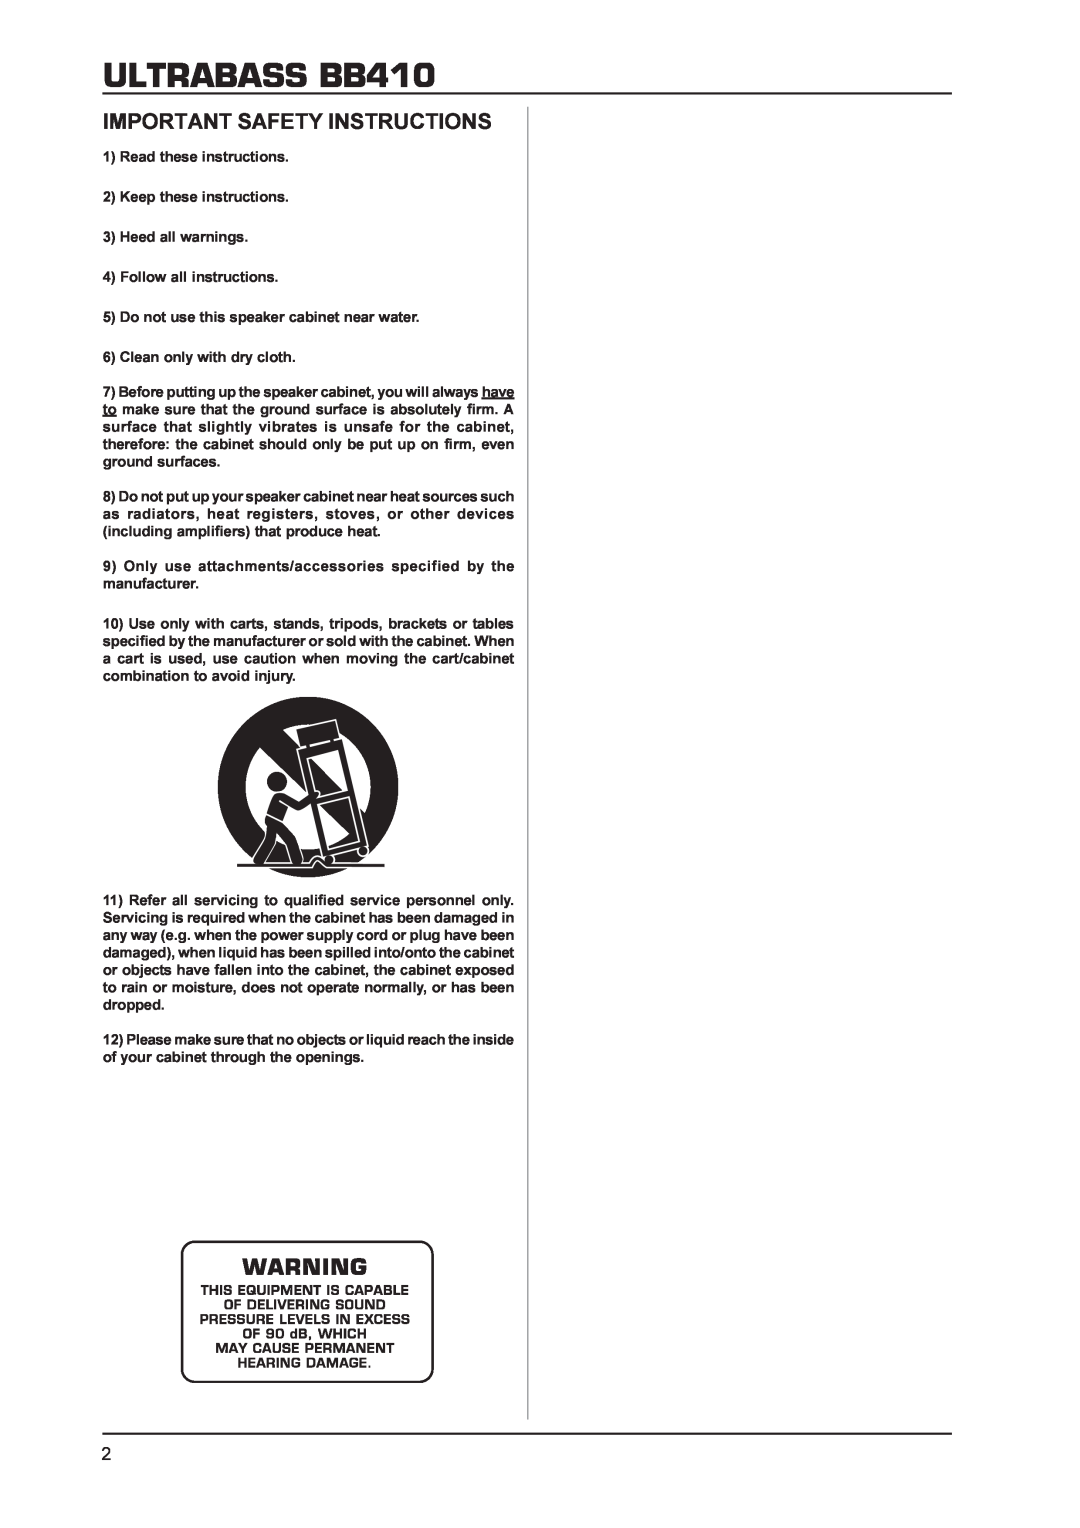 Behringer manual ULTRABASS BB410, Important Safety Instructions 